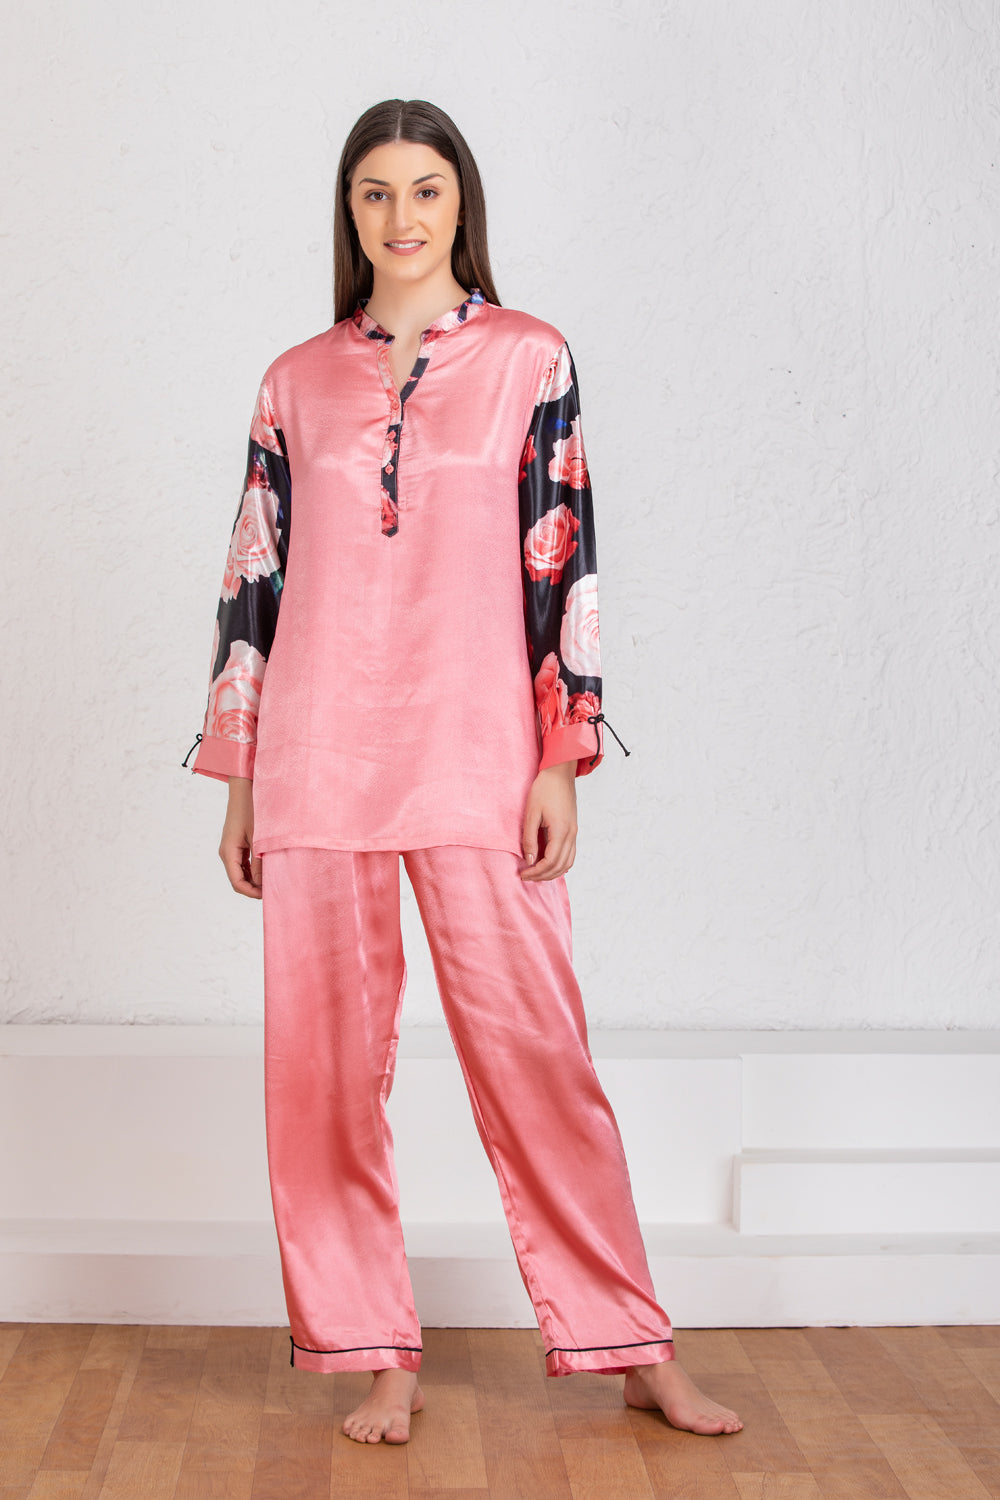 Plain satin Night suit with floral Print sleeves Private Lives